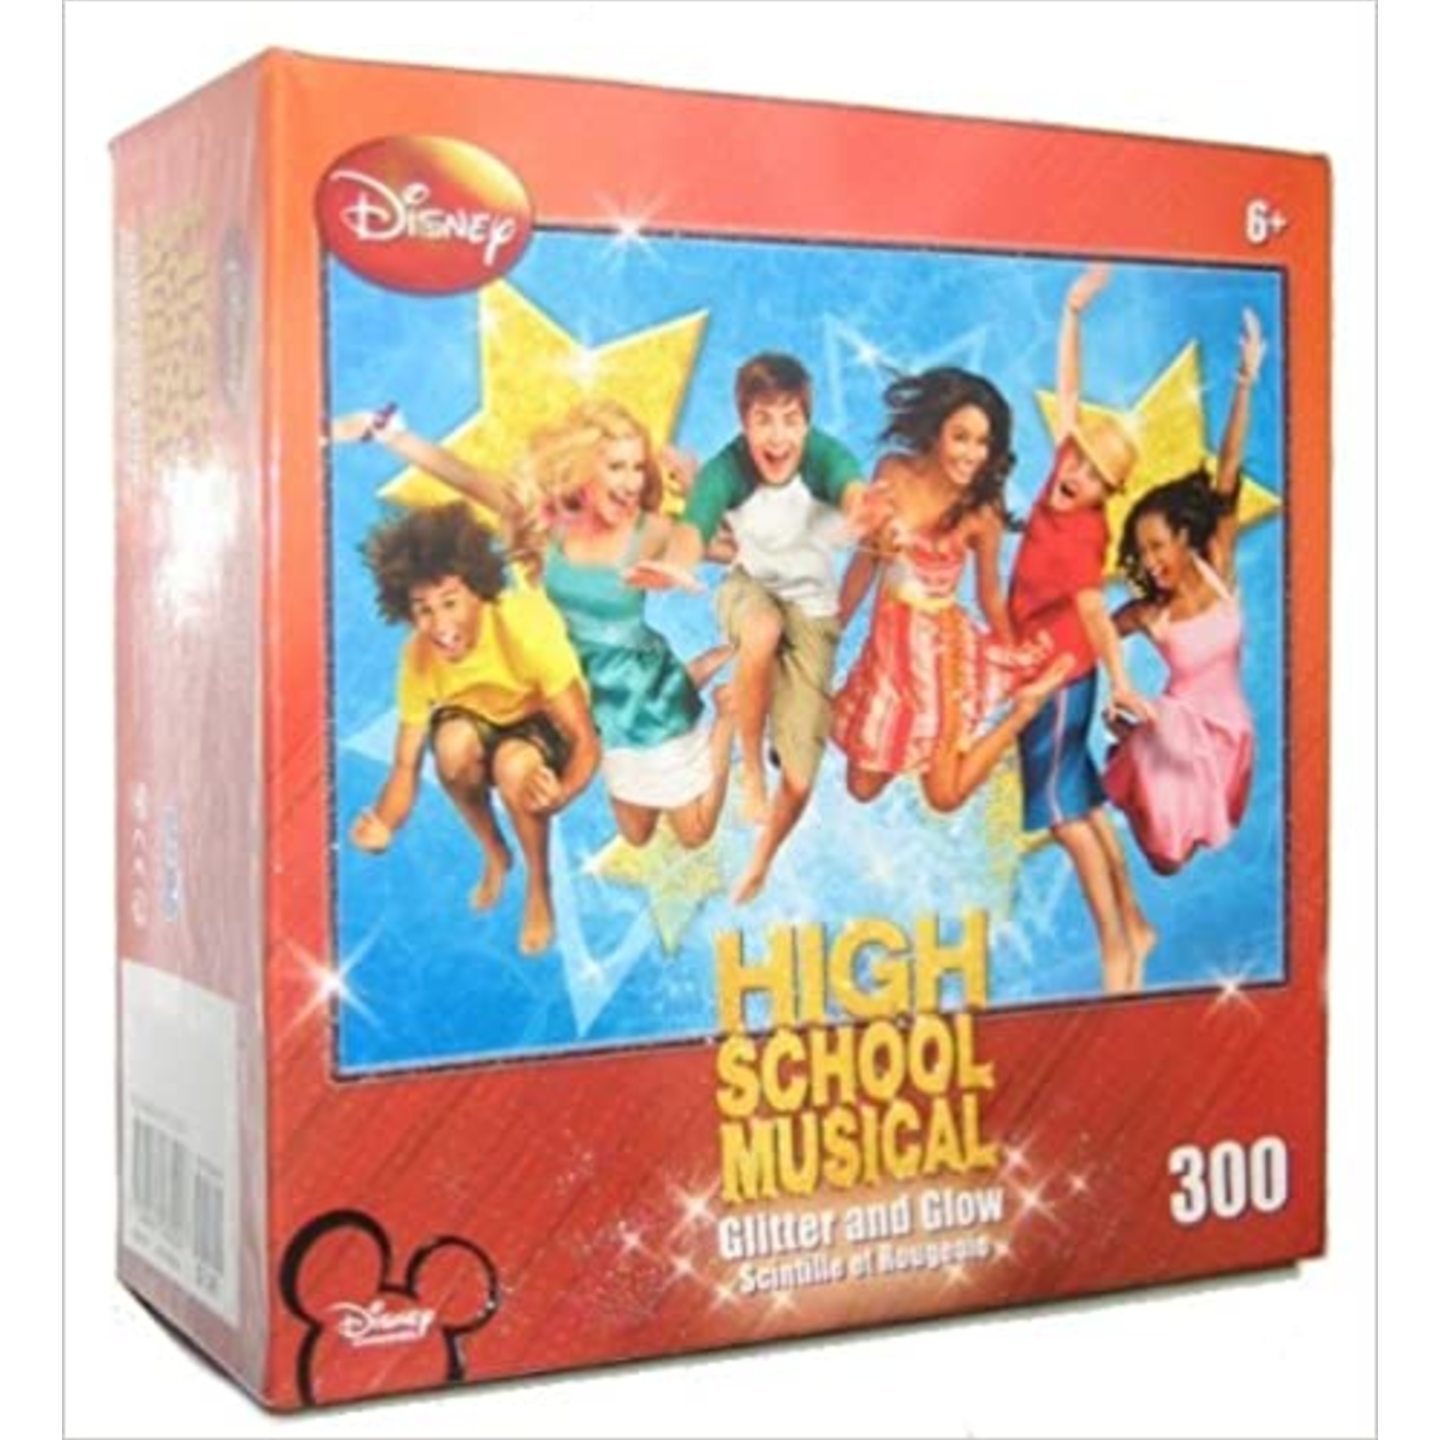 Disney High School Musical Glitter and Glow Puzzle (6 years+)